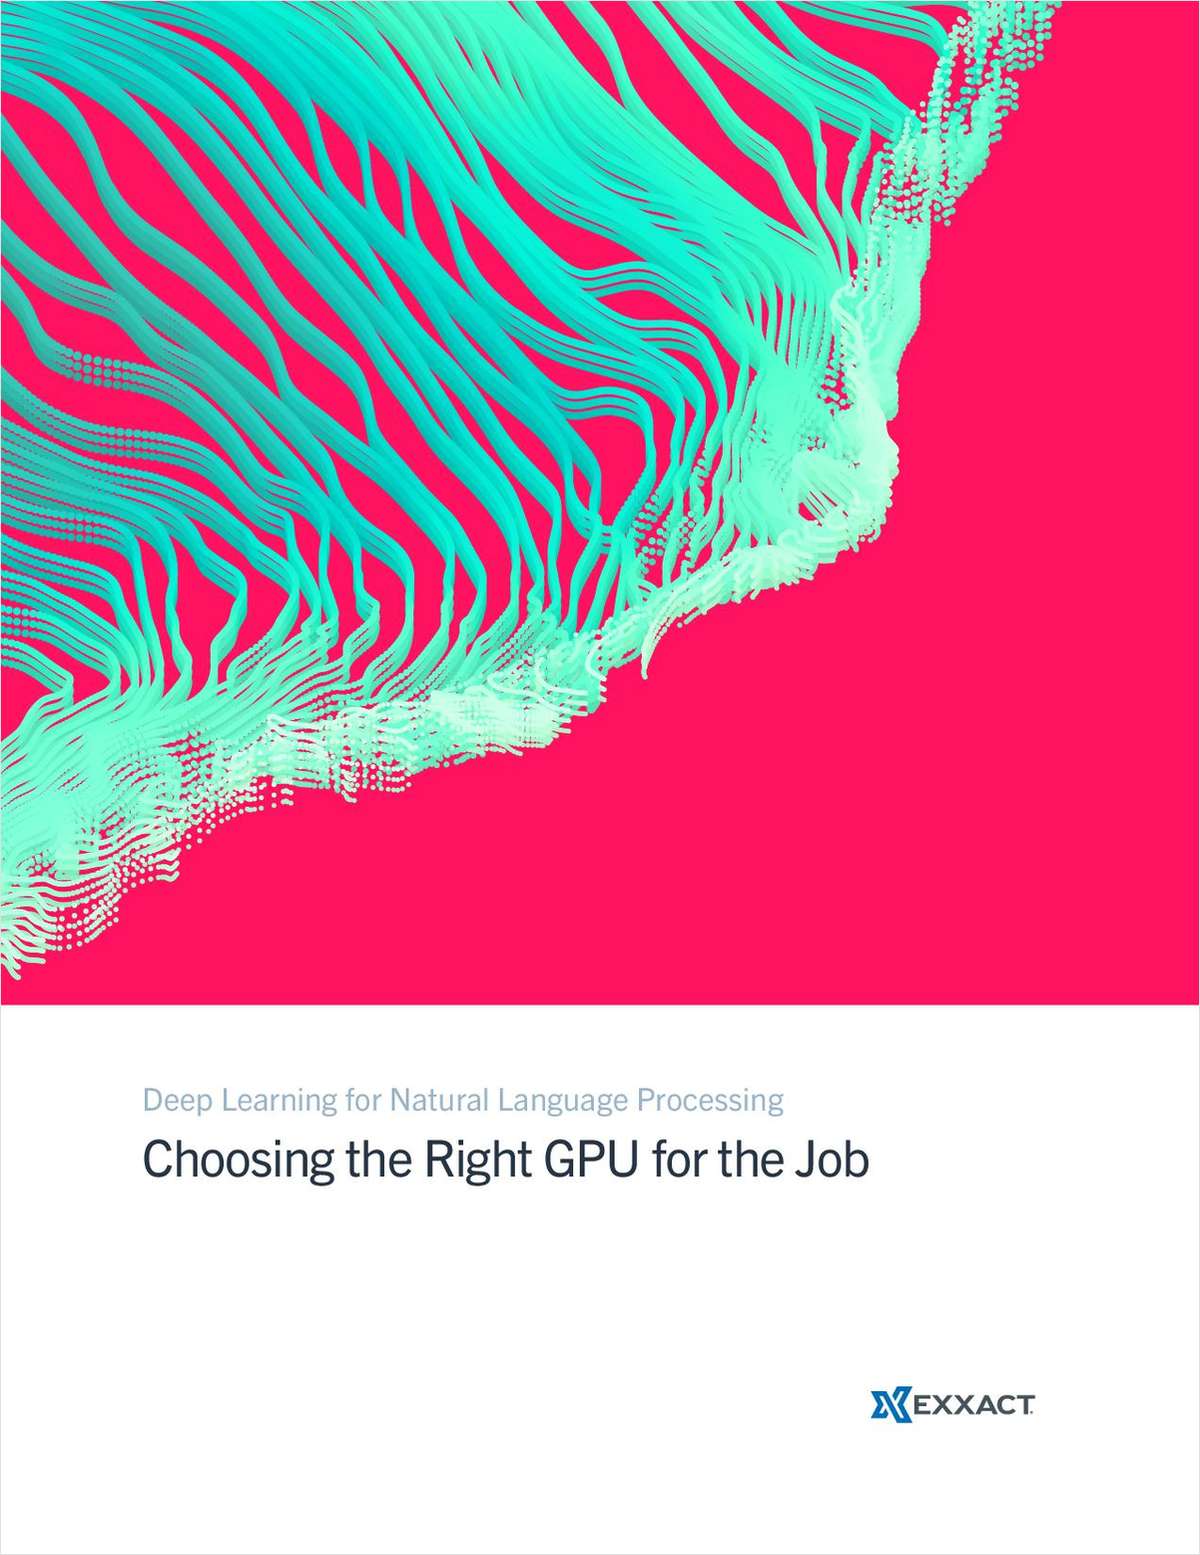 Deep Learning for Natural Language Processing -- Choosing the Right GPU for the Job